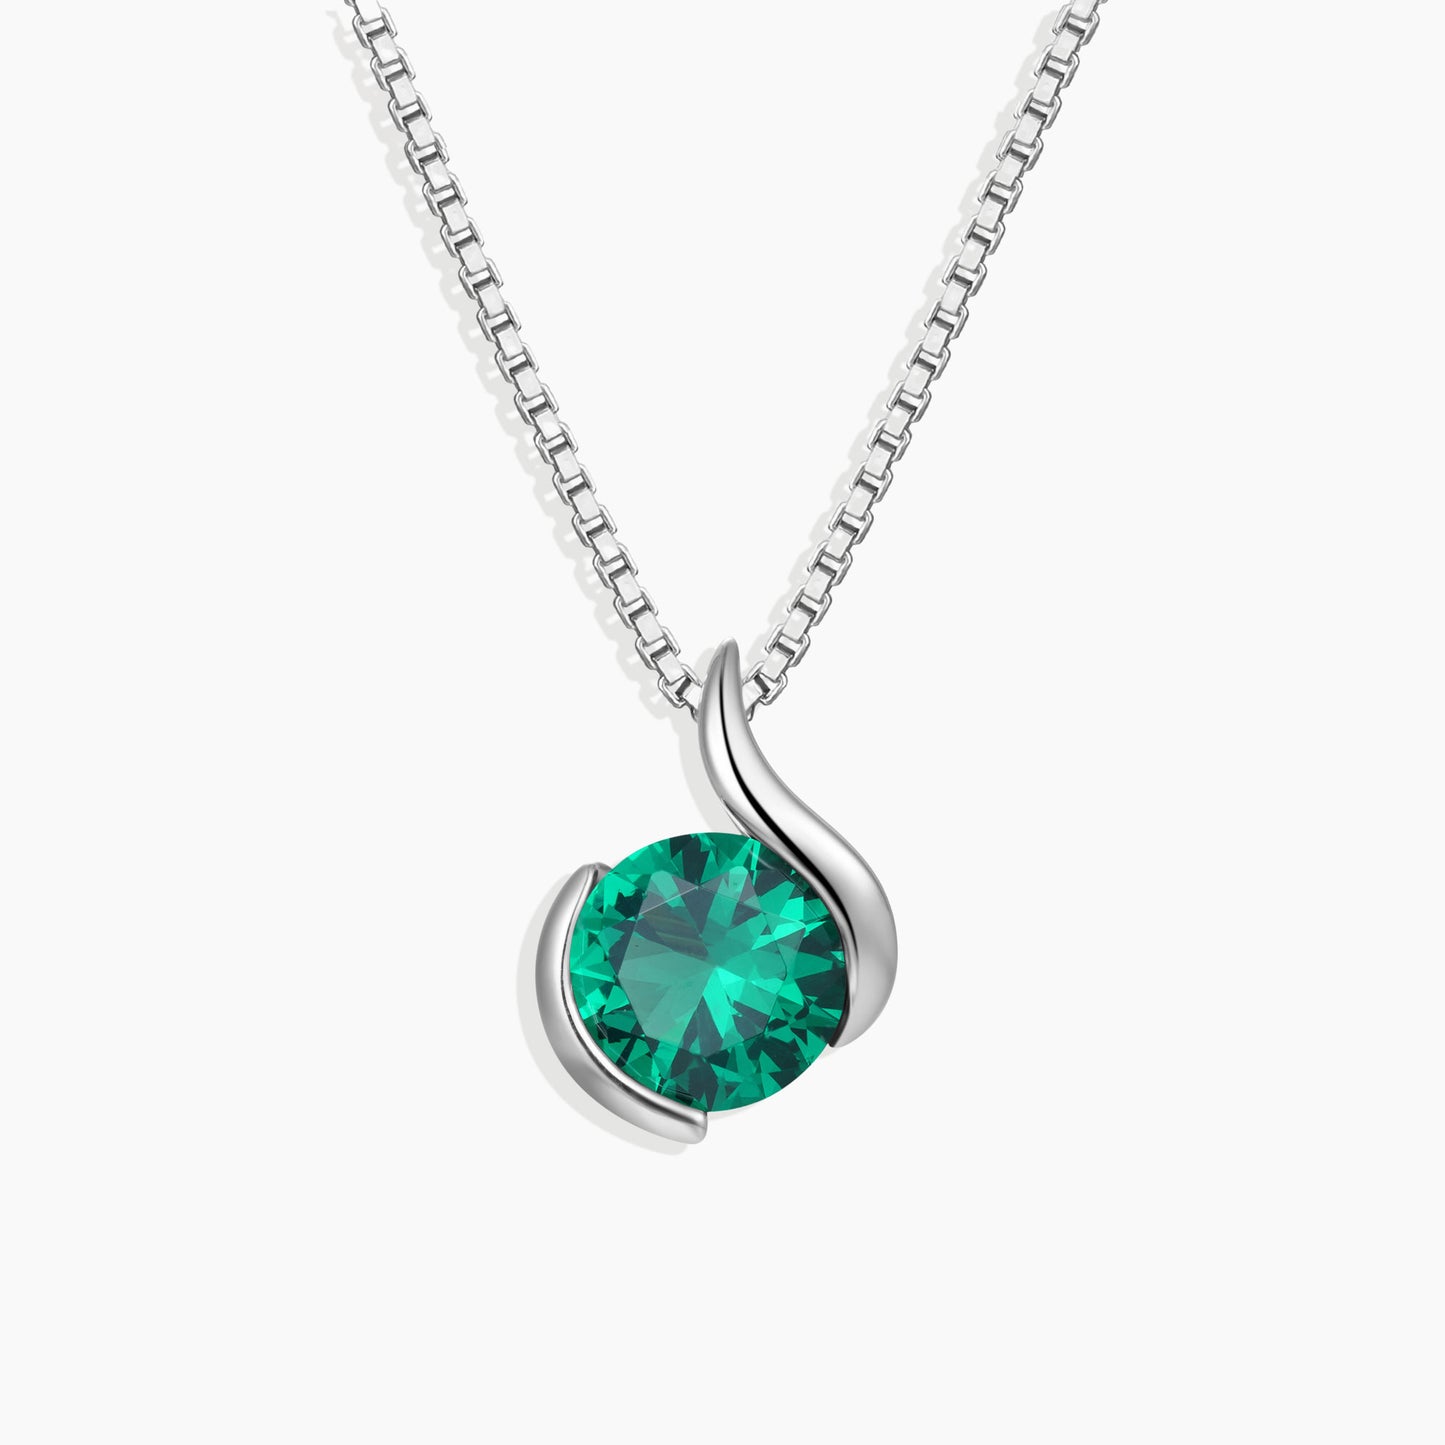 Emerald Monarch Pendant Necklace in Sterling Silver